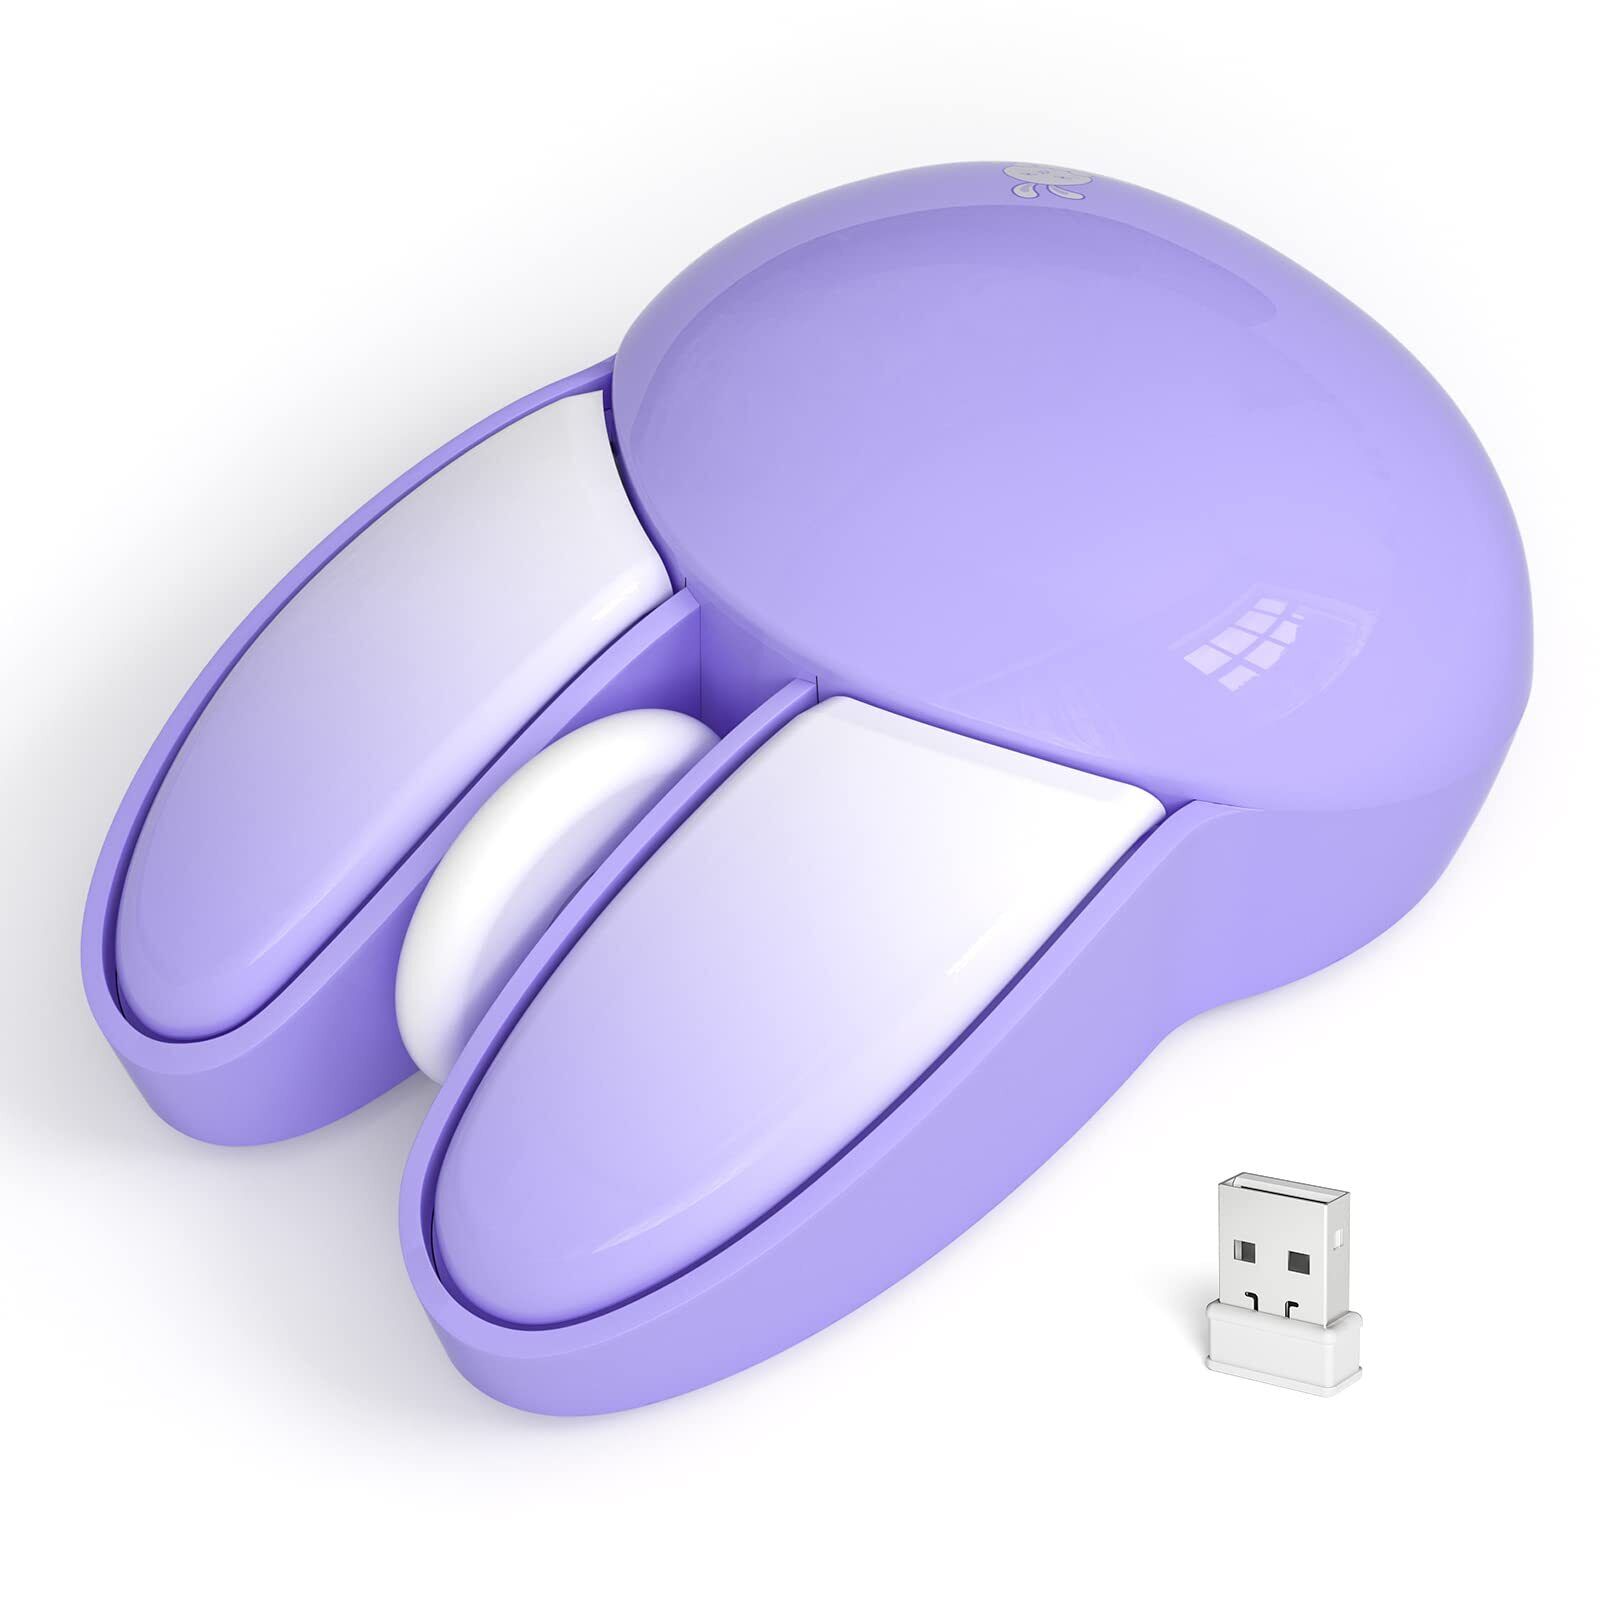 Wireless Silent Mouse, Cute Rabbit Designs, 2.4 GHz with USB Mini Receiver, O...